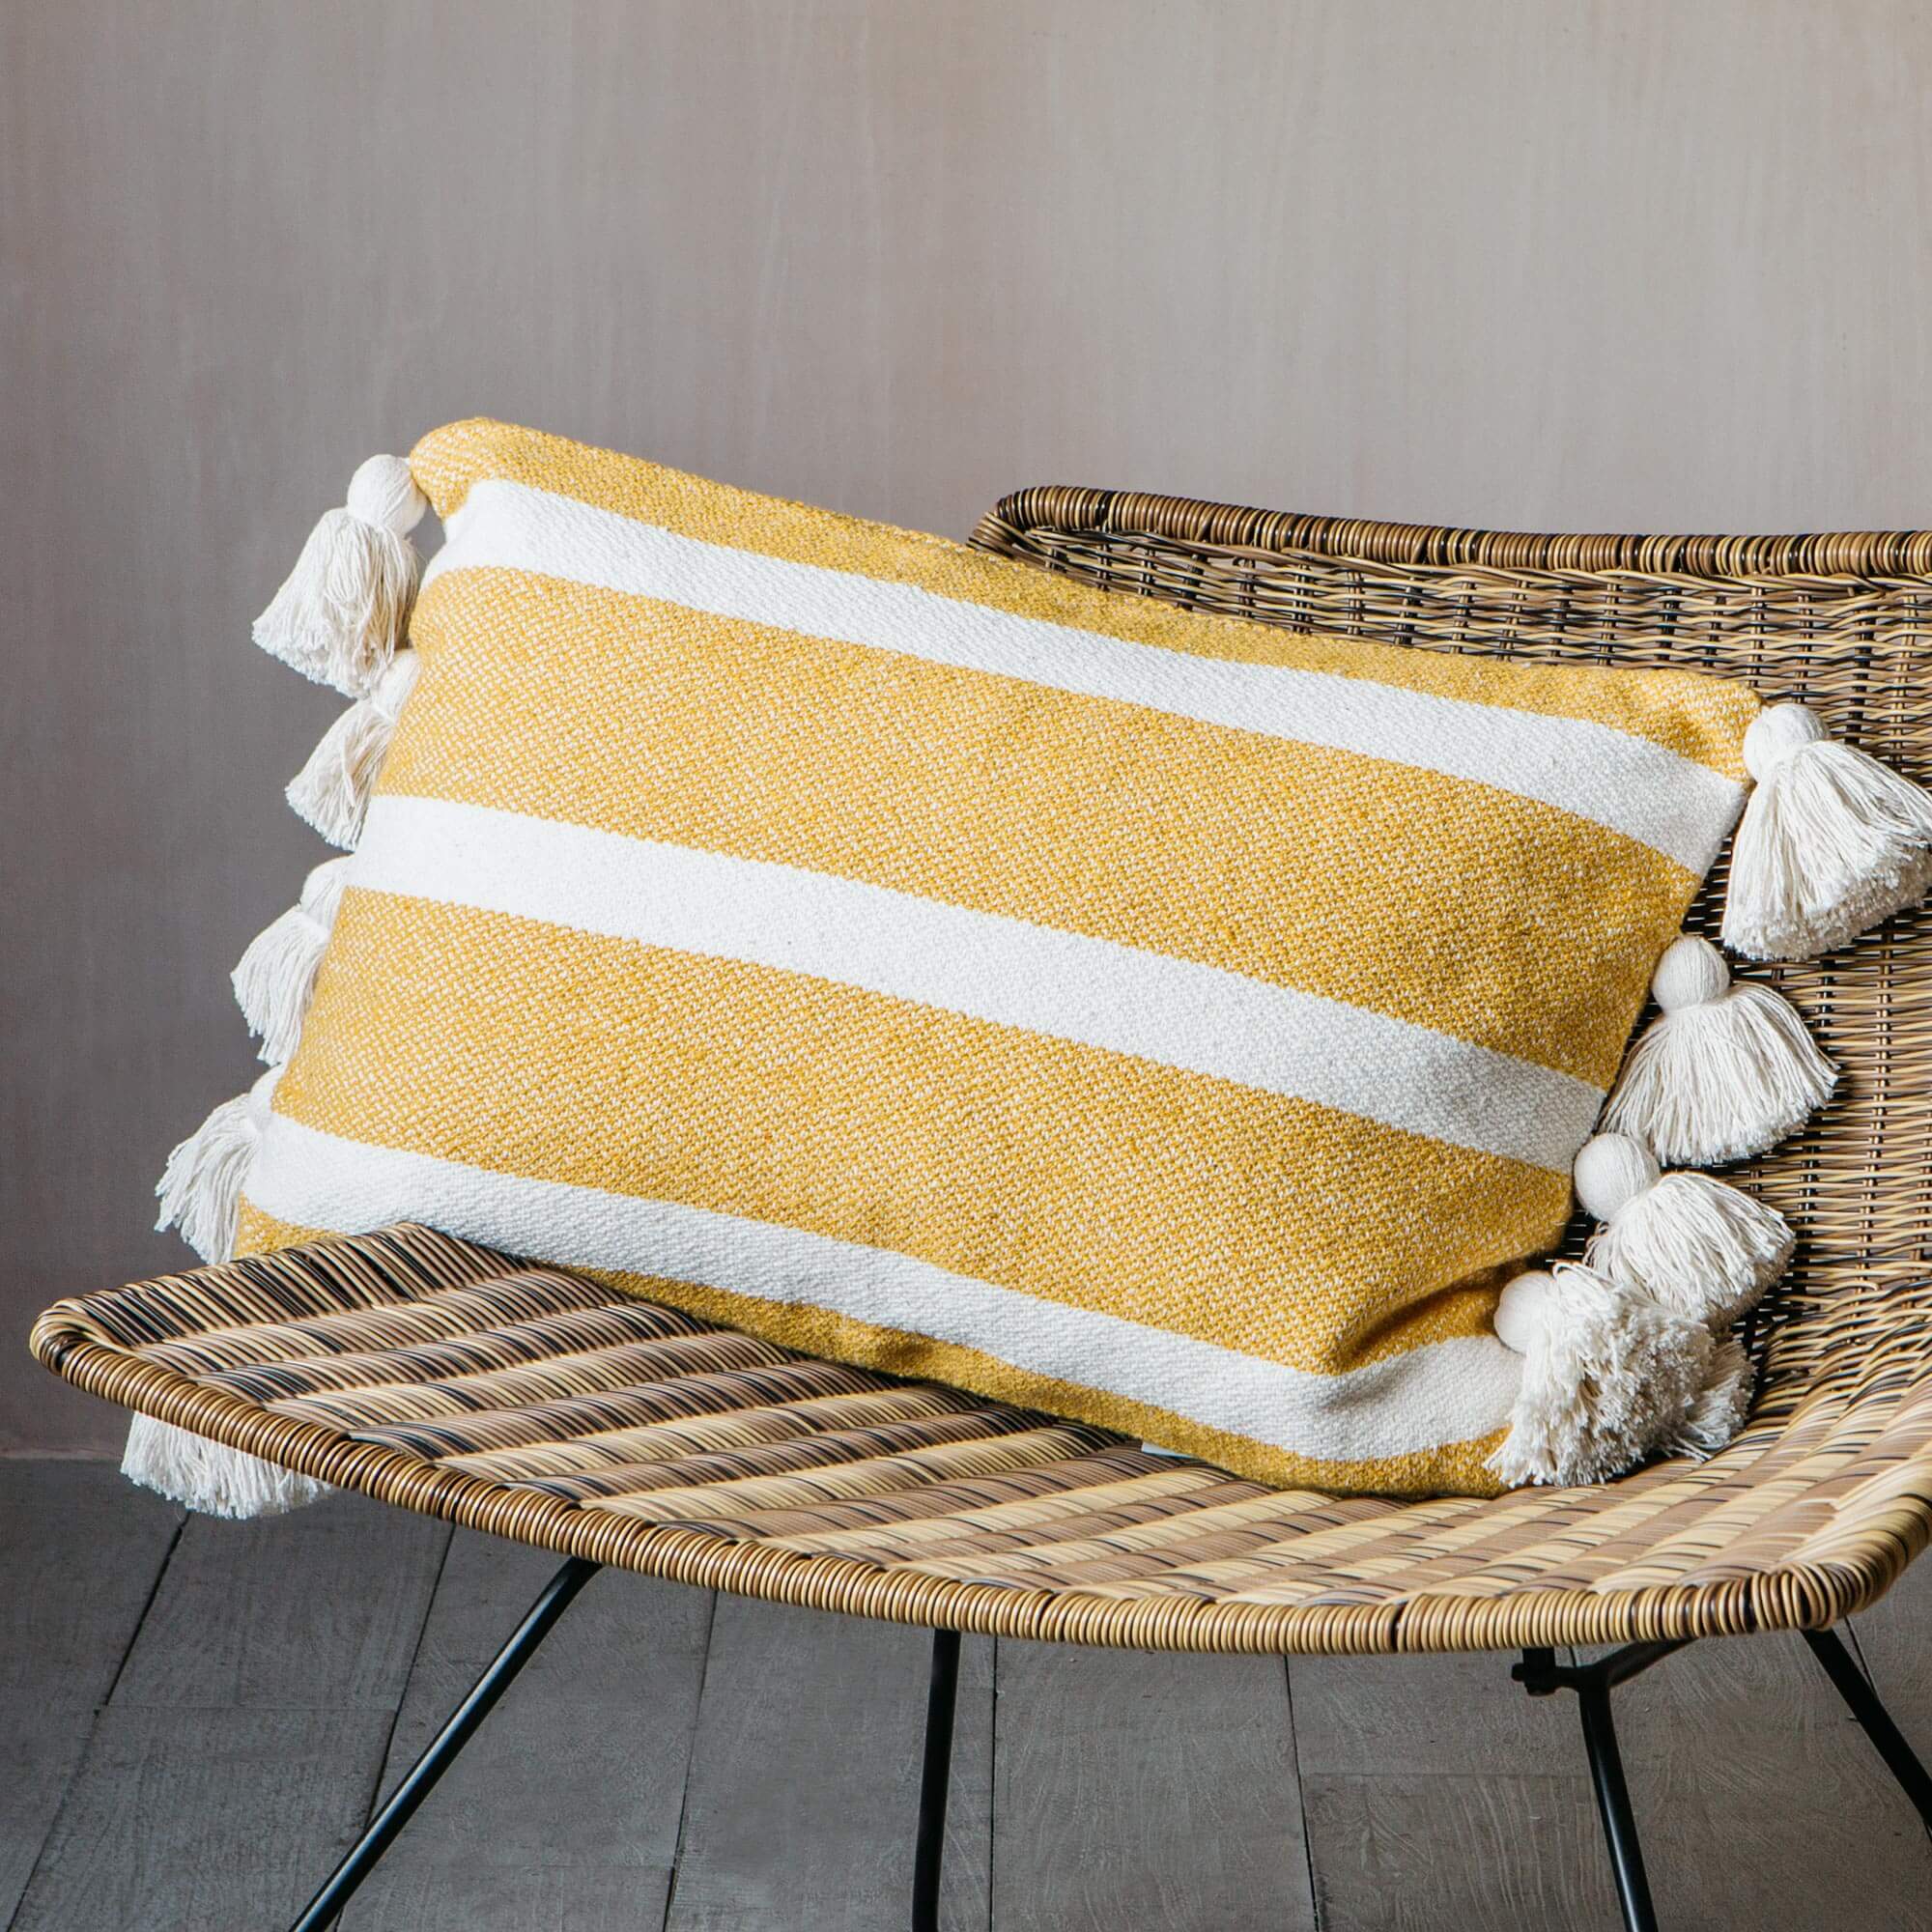 Read more about Graham and green cream and mustard tassel cushion